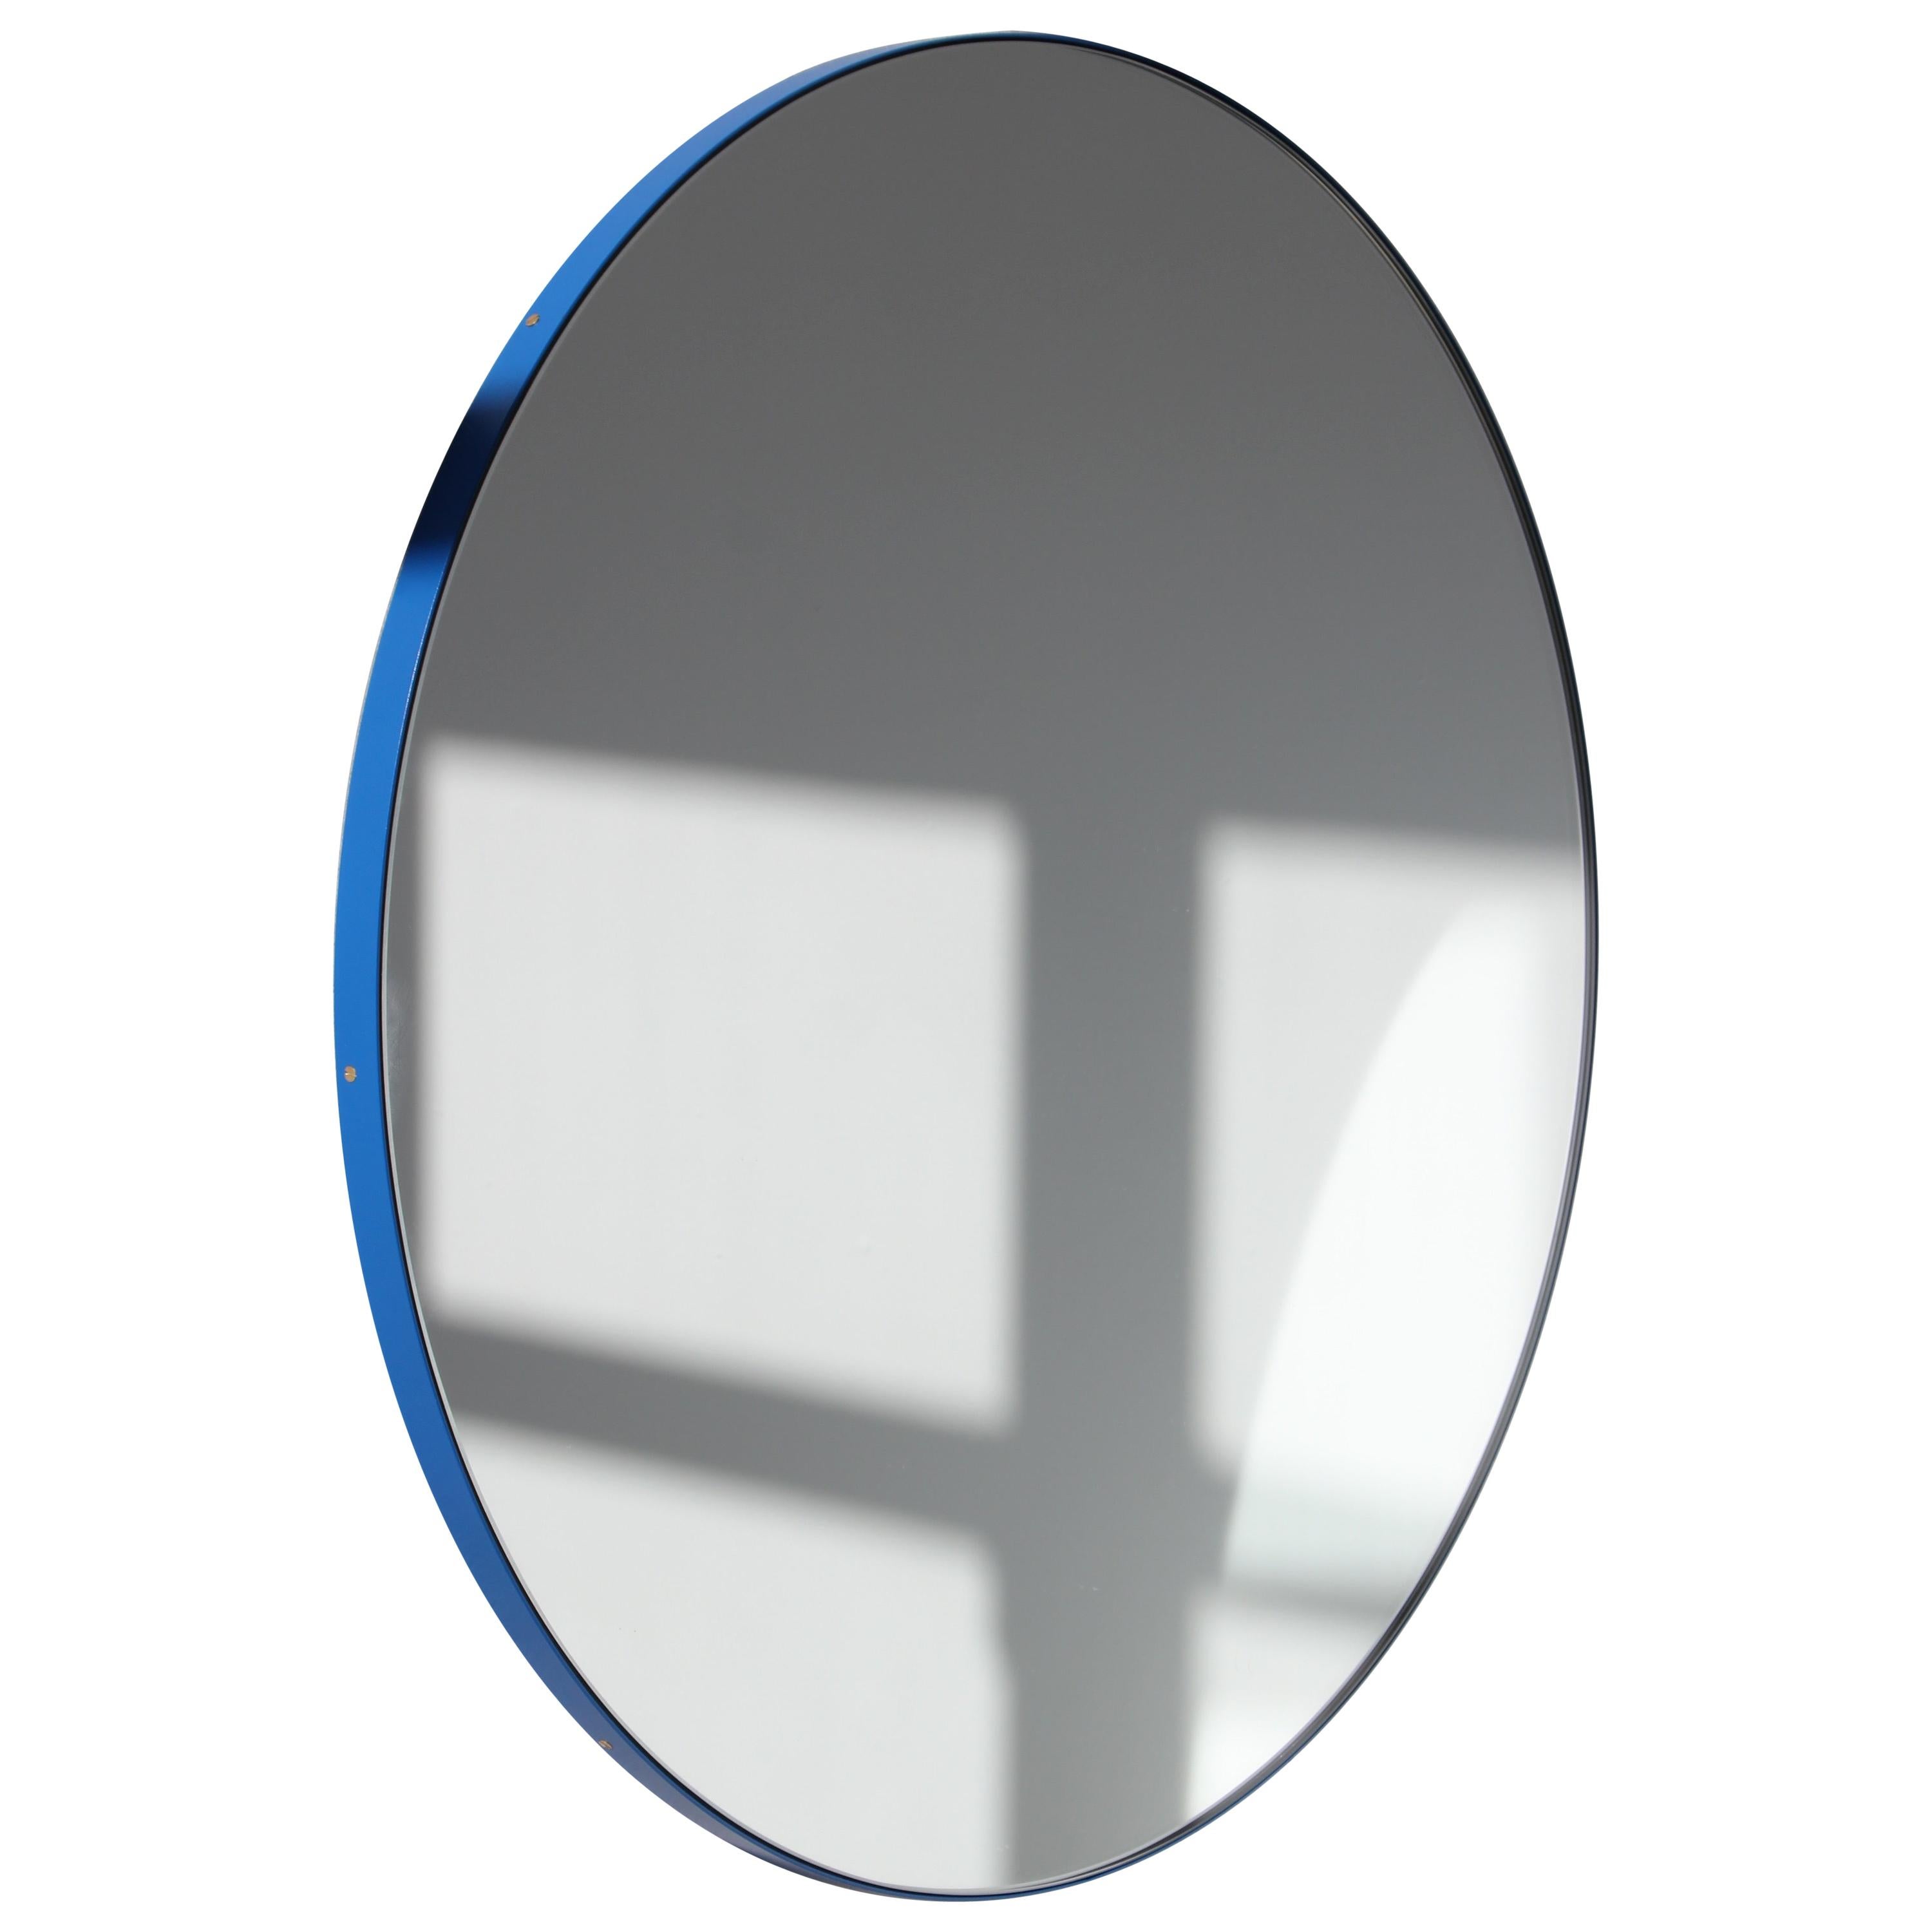 Orbis™ Round Modern Customizable Mirror with Blue Frame - Large